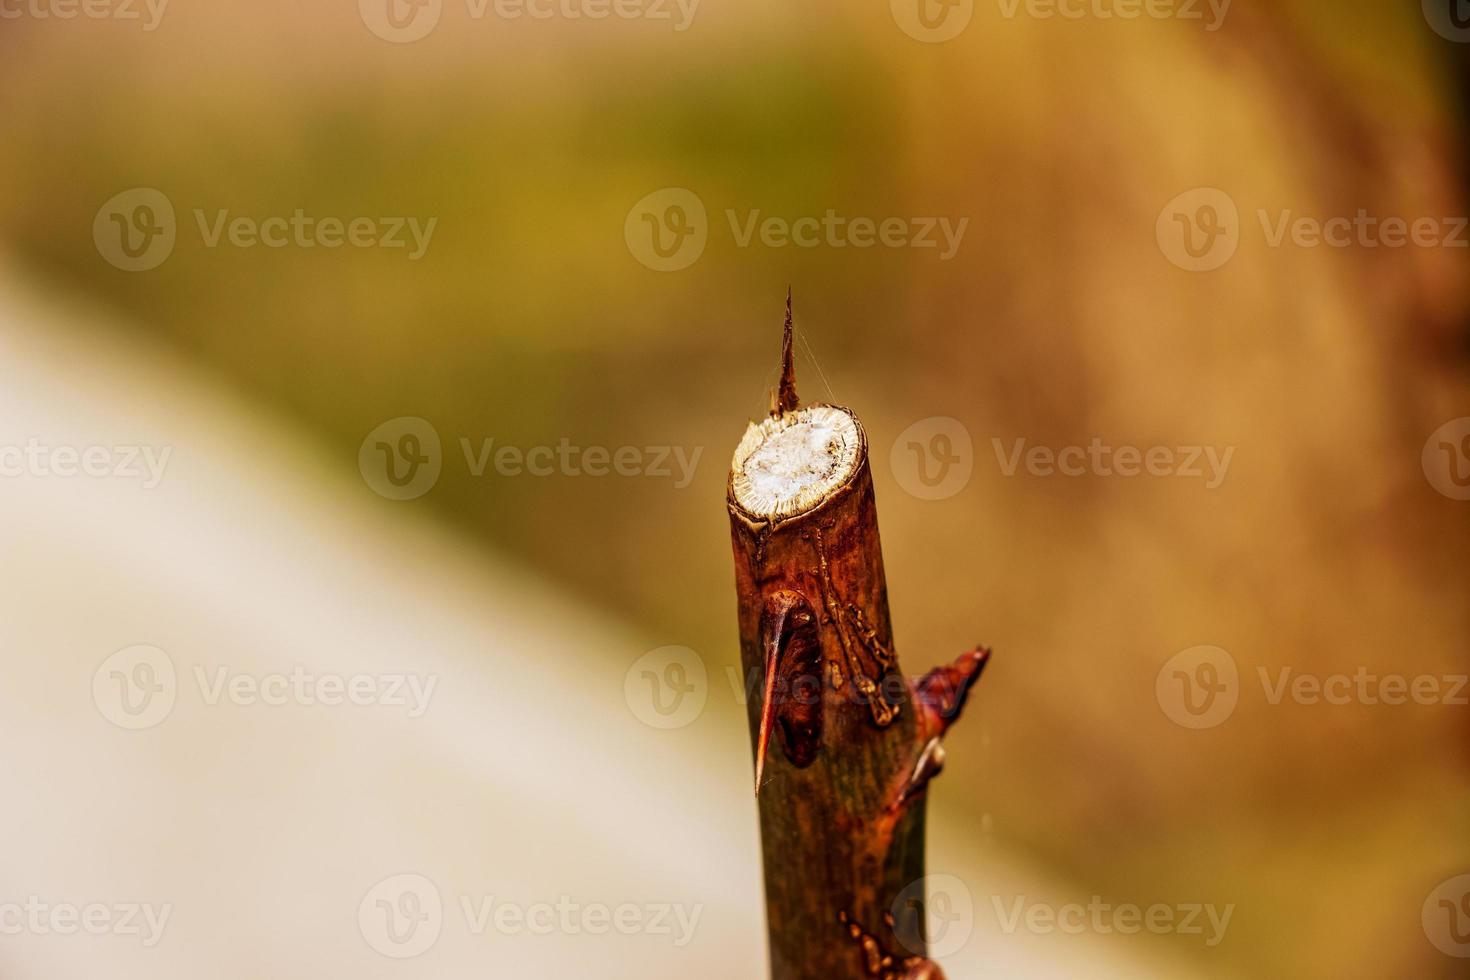 Close-up of a cut rose branch with thorns in spring against a blurred background. Spring pruning photo